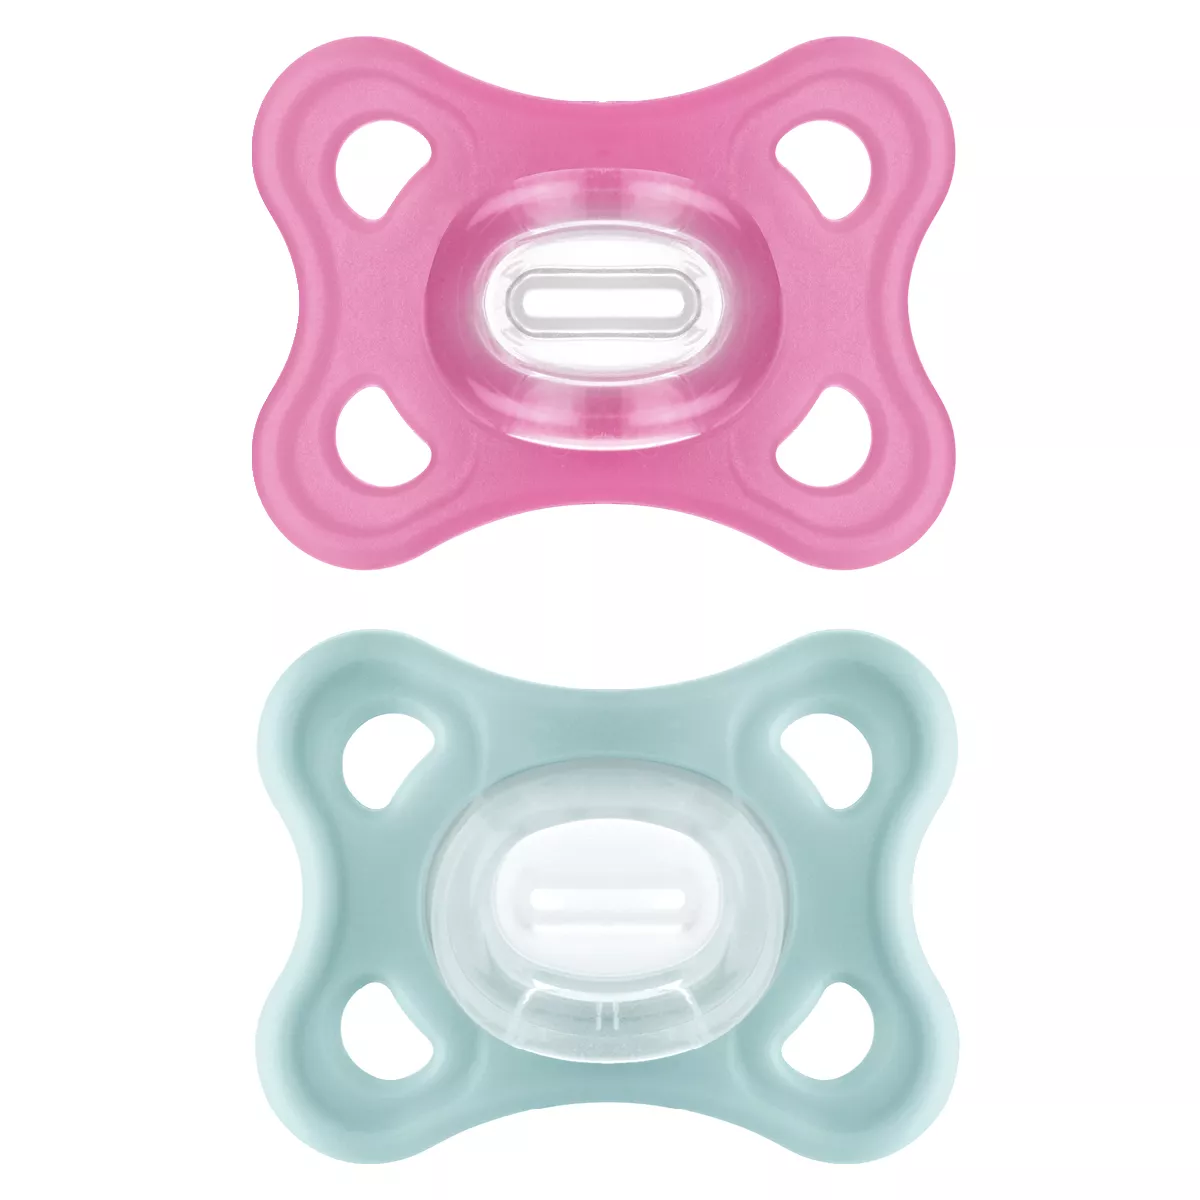 MAM Comfort Silicone Soother  3-12 months, set of 2